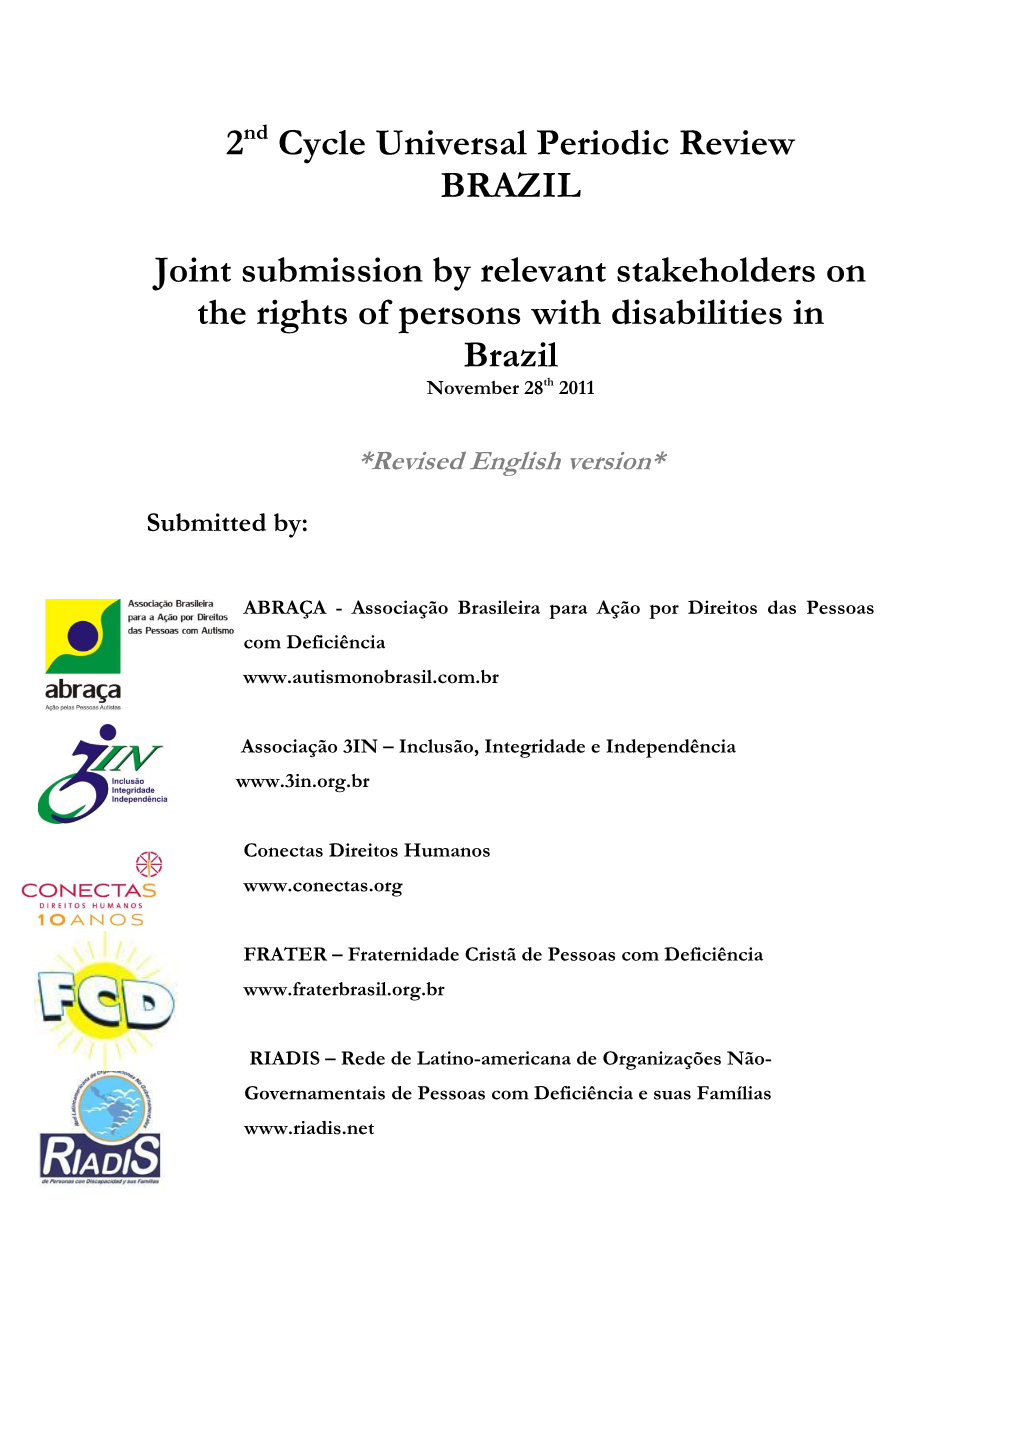 2Nd Cycle Universal Periodic Review BRAZIL Joint Submission by Relevant Stakeholders on the Rights of Persons with Disabilities